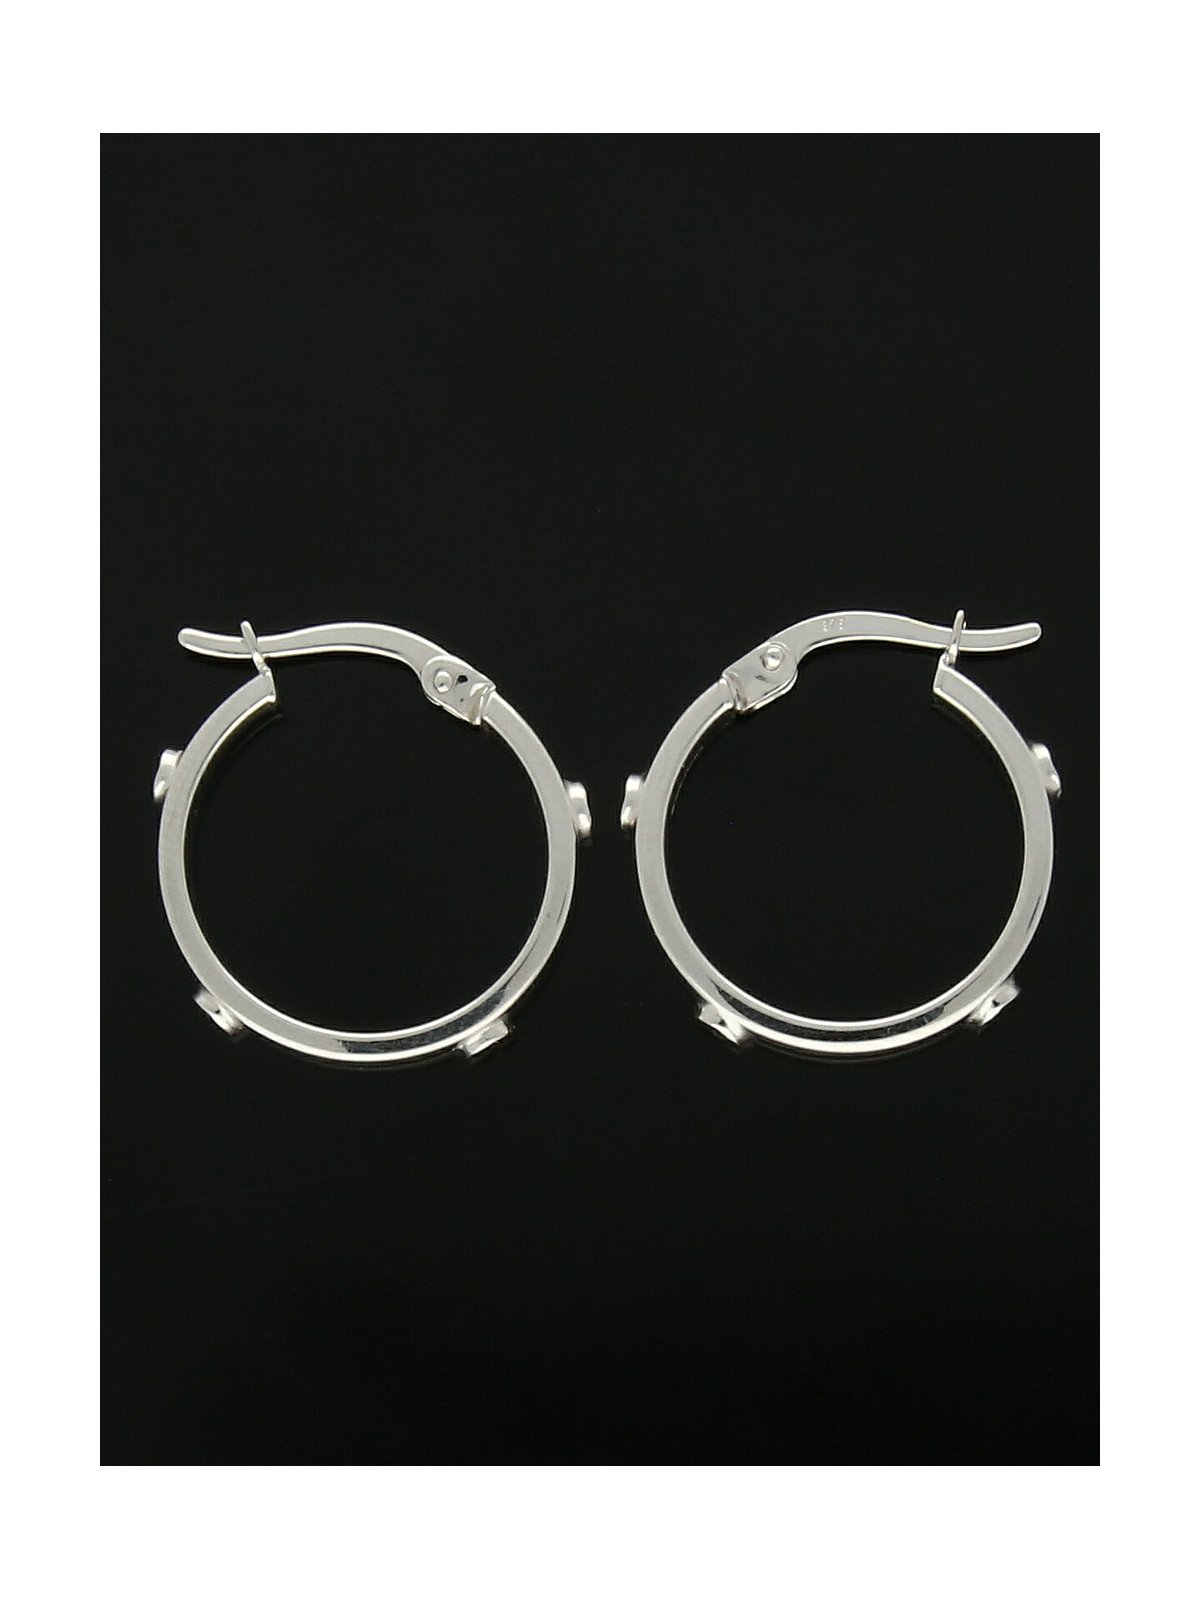 Hoop Earrings with Gold Screws 18mm in 9ct White Gold